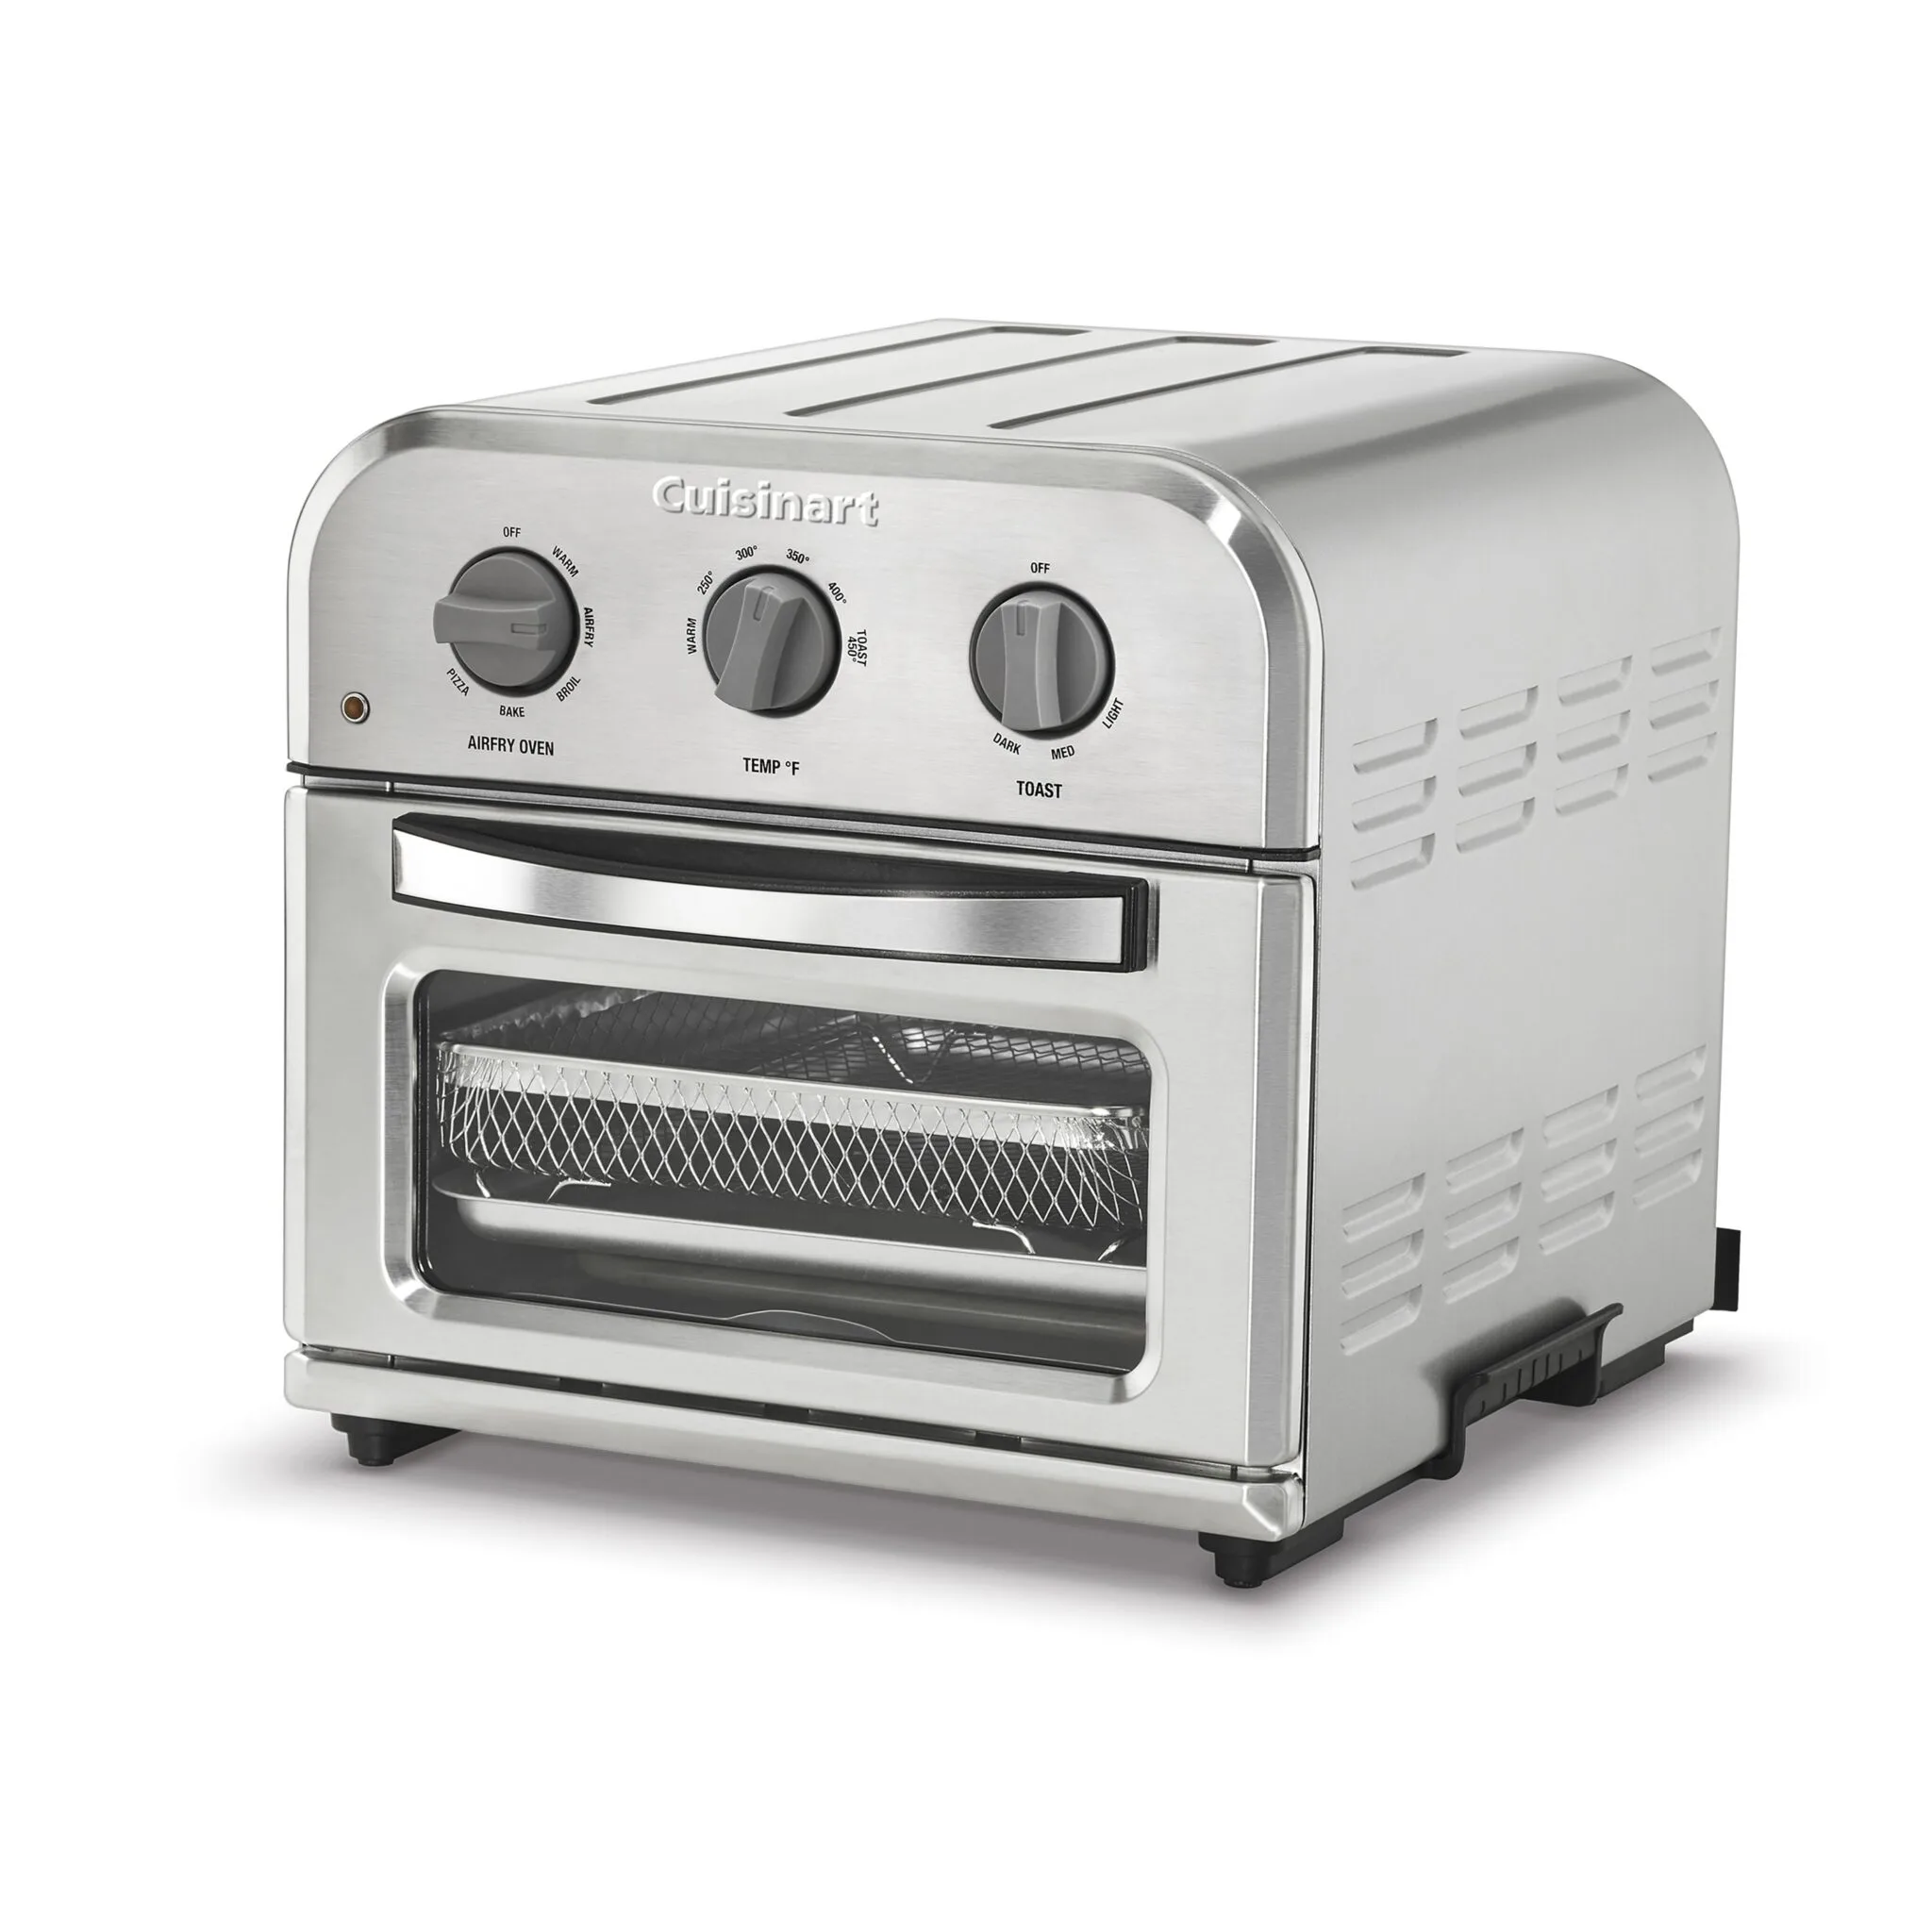 40287 Cuisinart Compact Air Fryer Toaster Oven scaled jpg